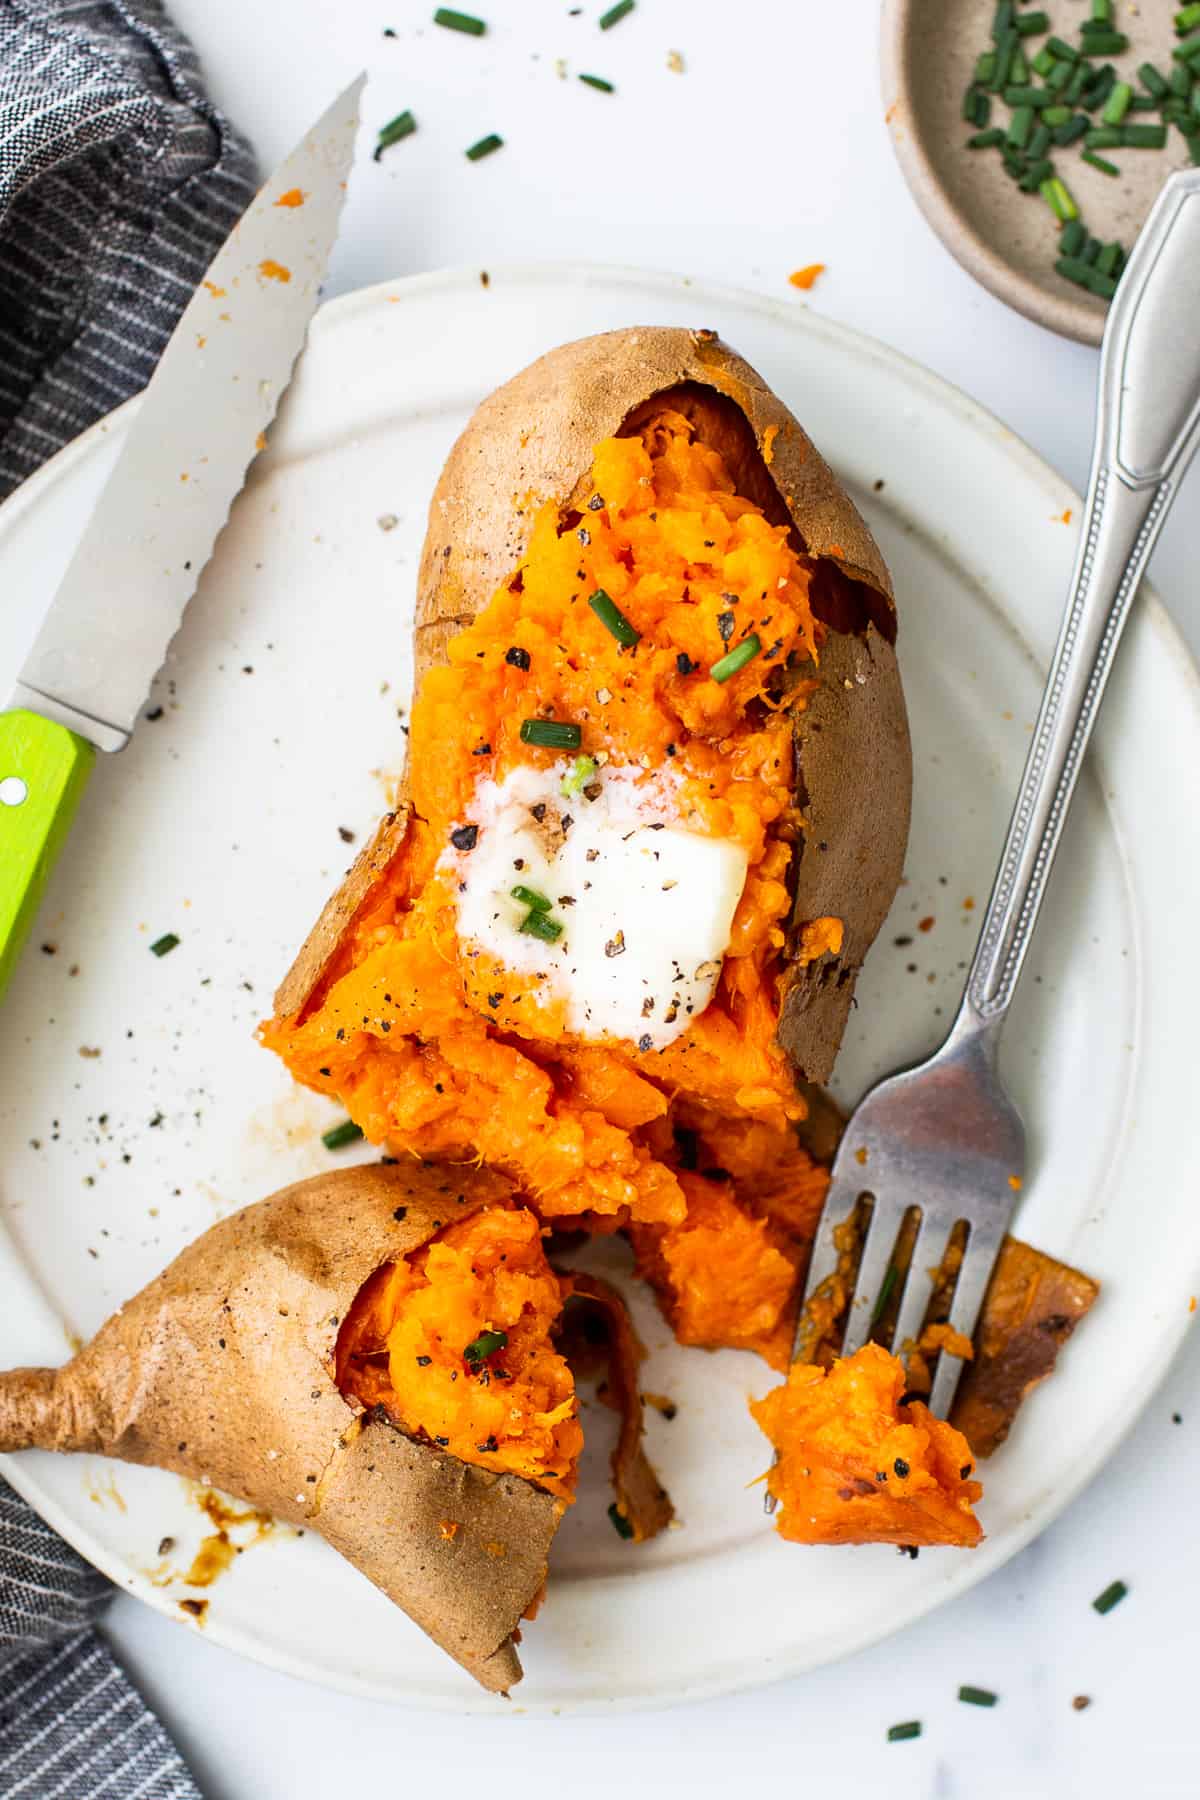 Baked sweet potato on a plate with a fork.